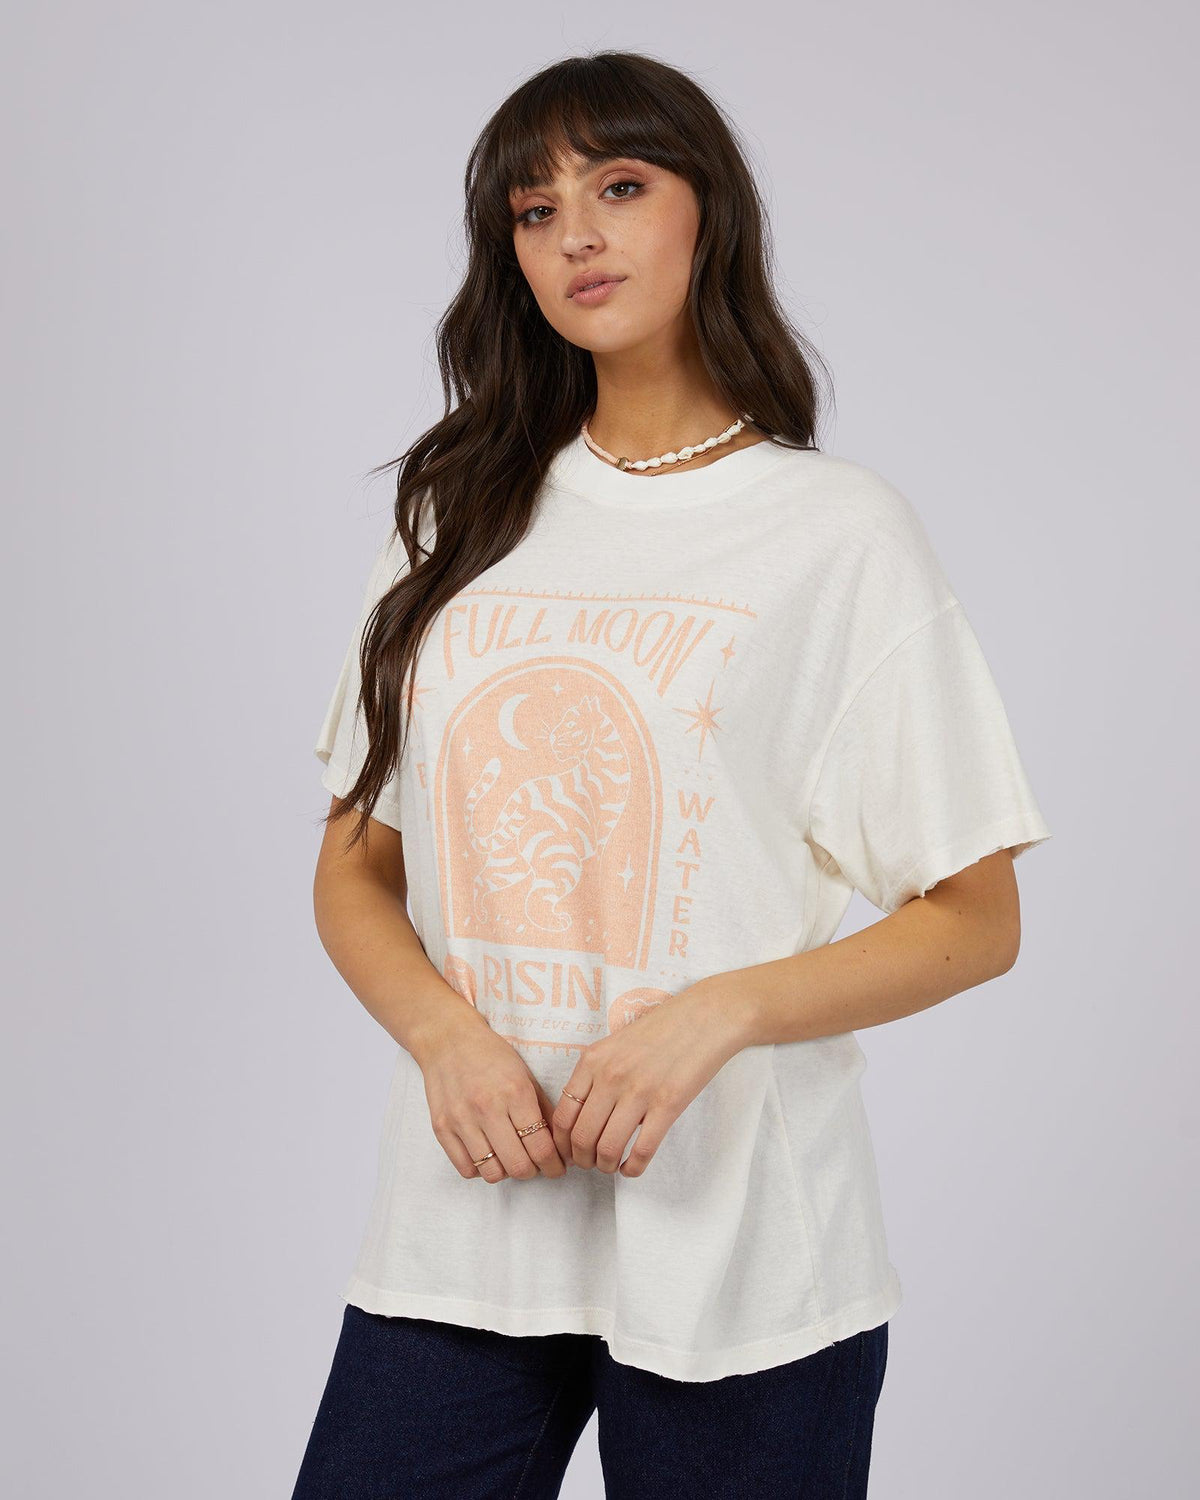 All About Eve-Rising Tee Vintage White-Edge Clothing